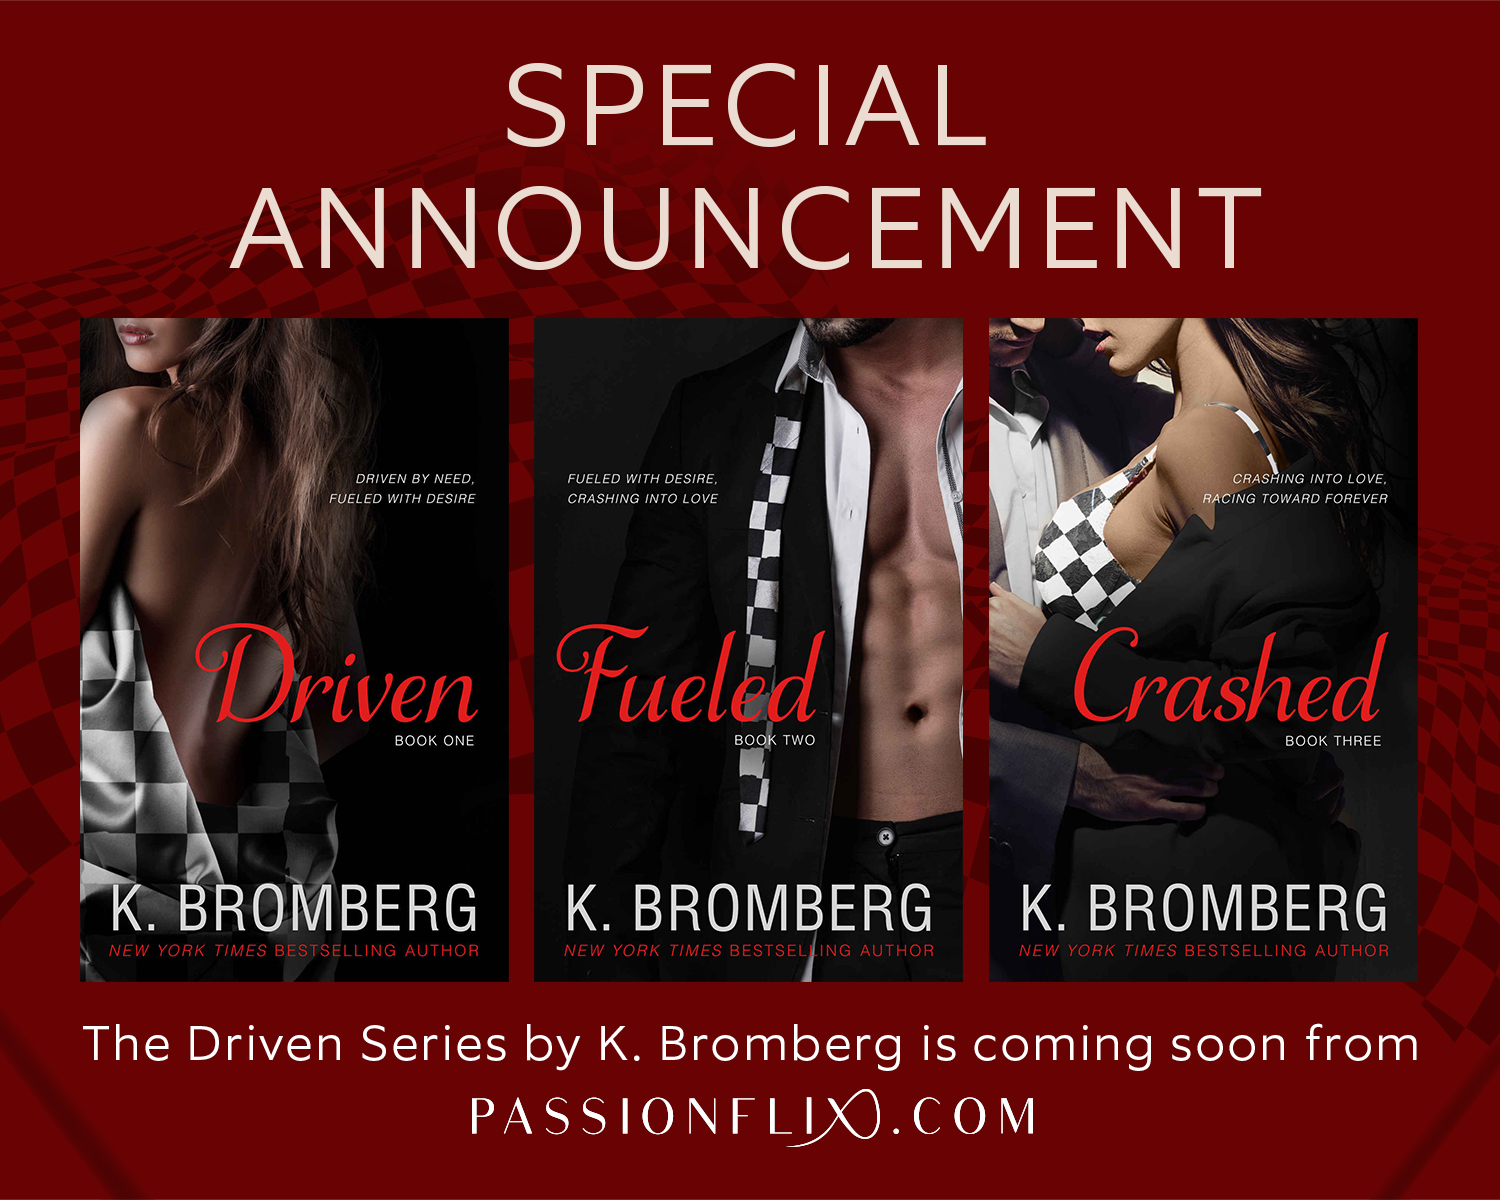 Special Announcement: The Driven Series - K. Bromberg.